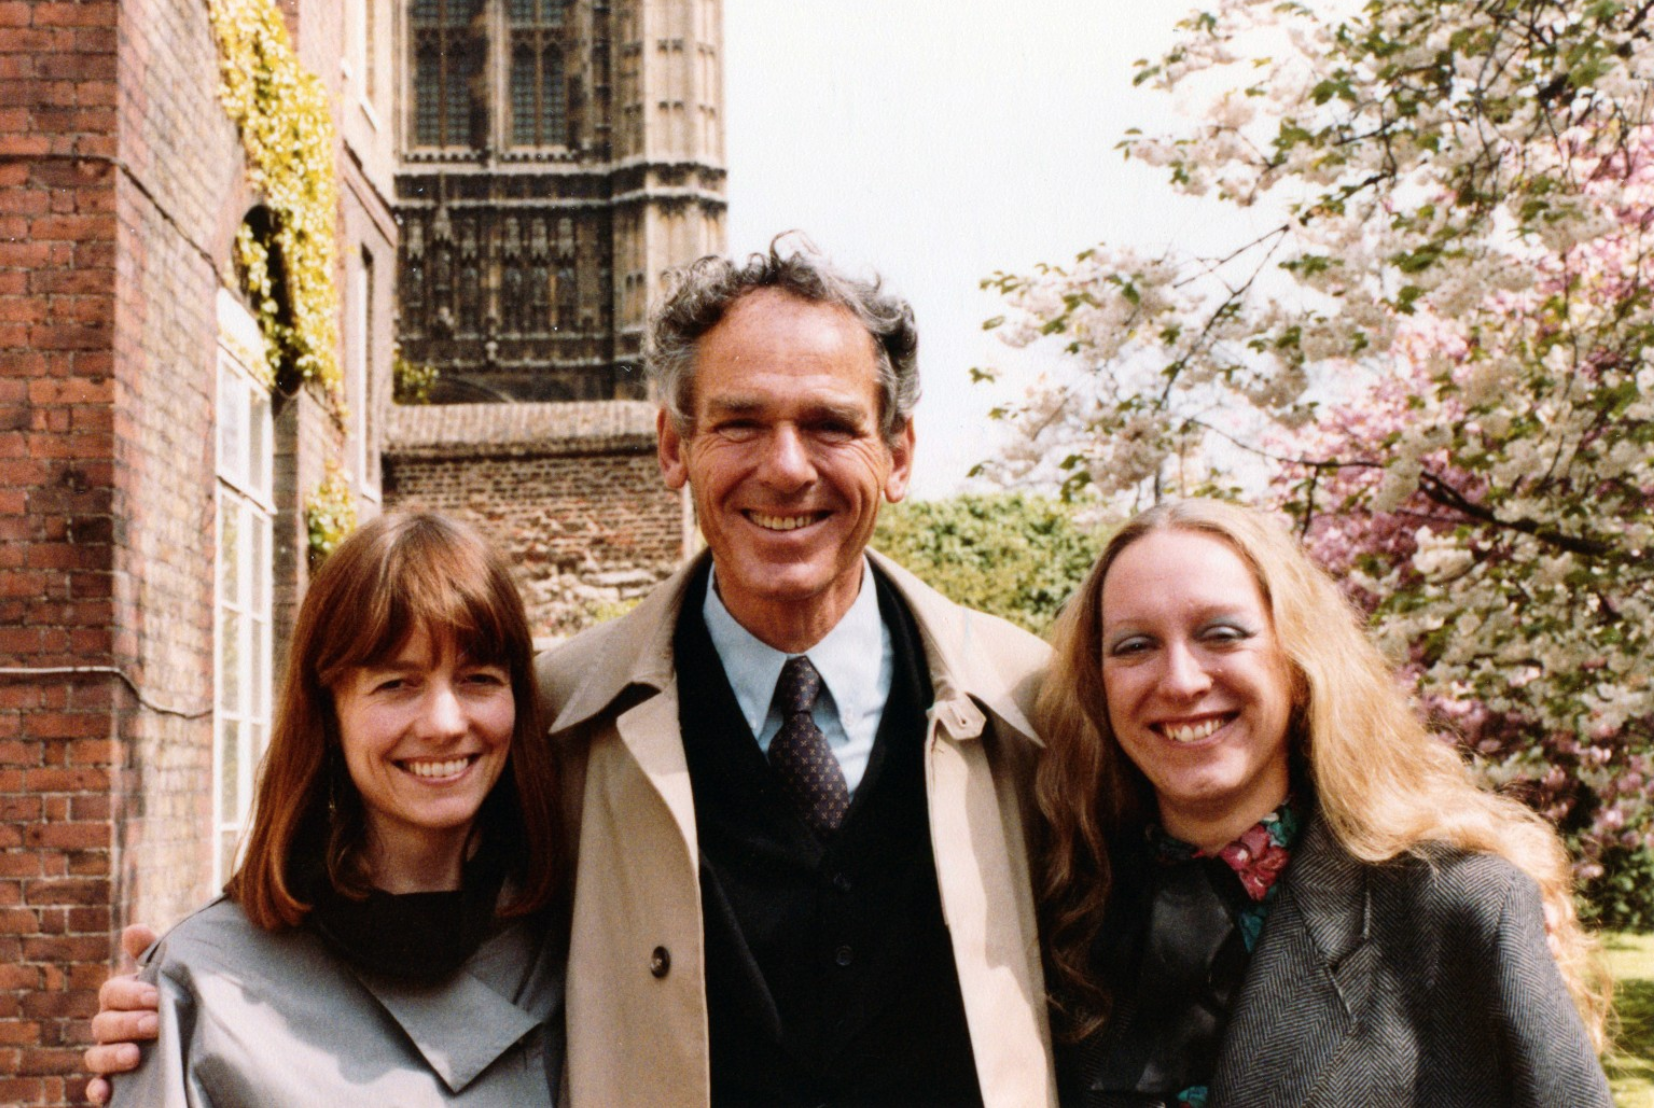 photo: Dr. William Thetford with Marian Russell and Eileen Wood